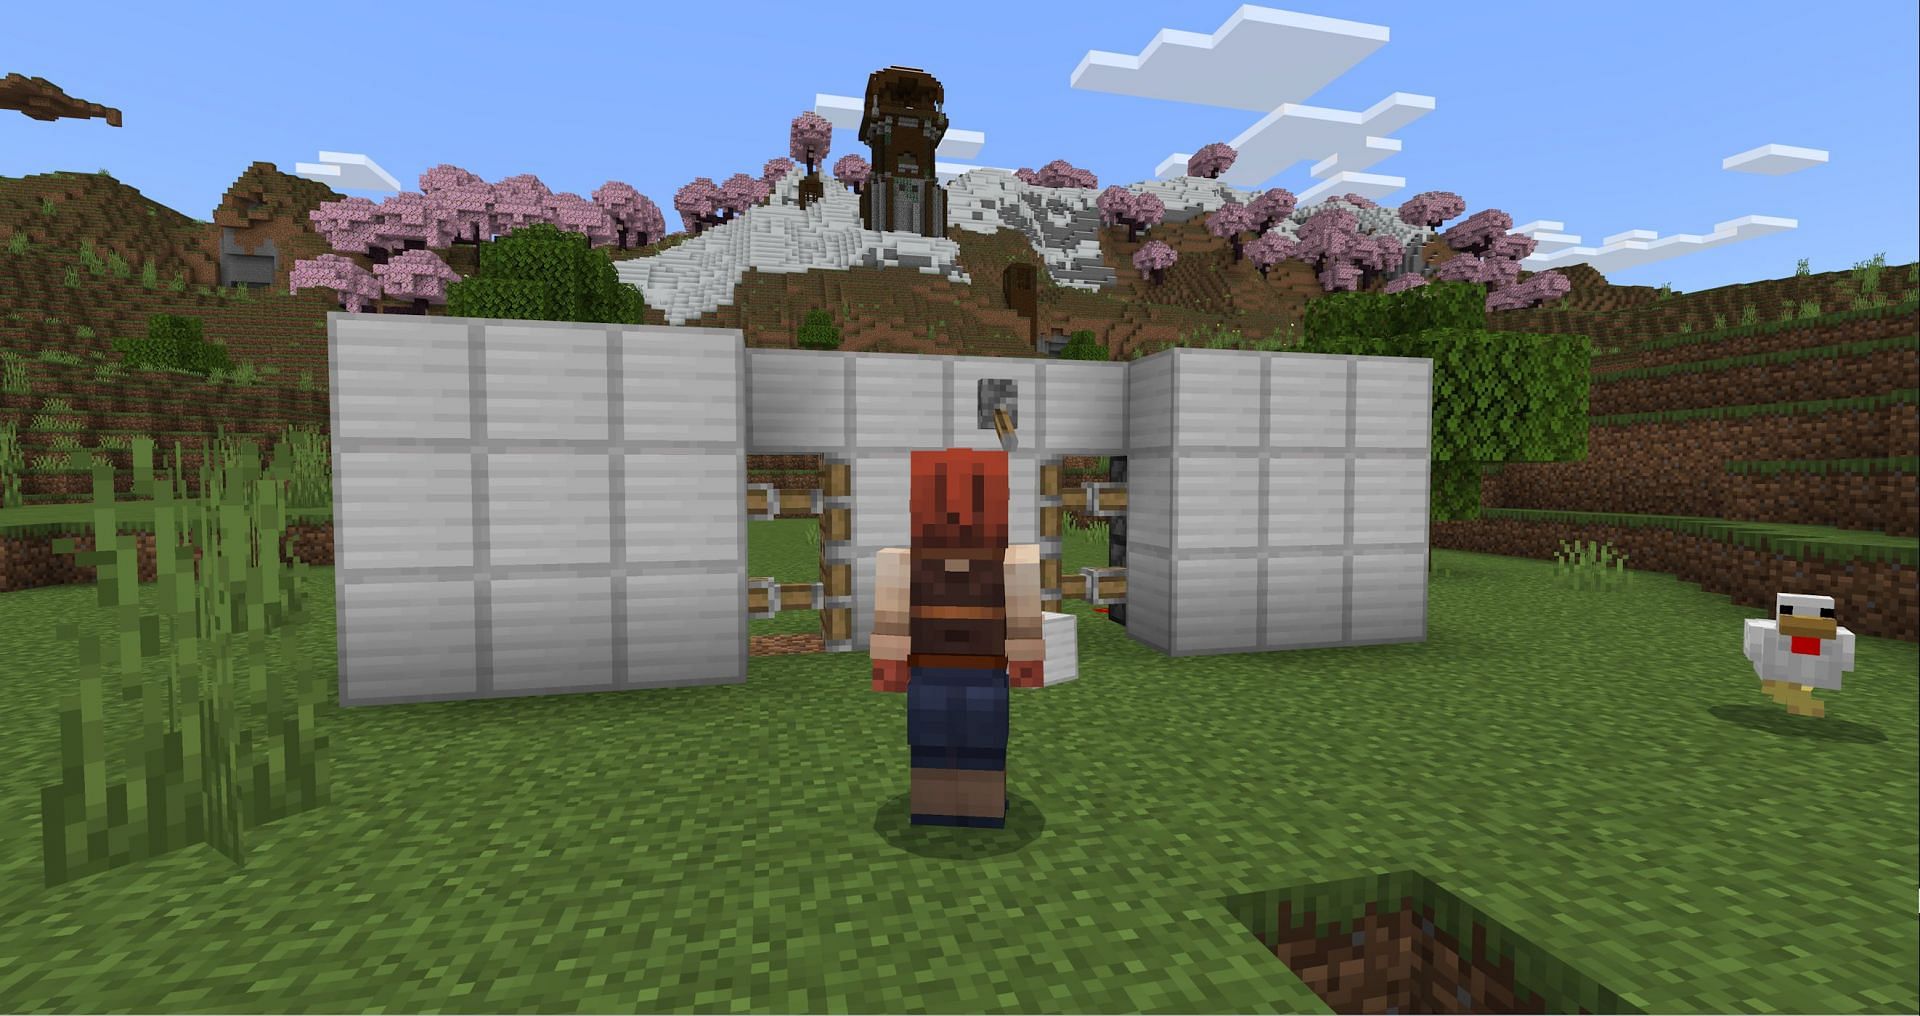 Even simple builds feel impressive with these redstone skins. (Image via Mojang)